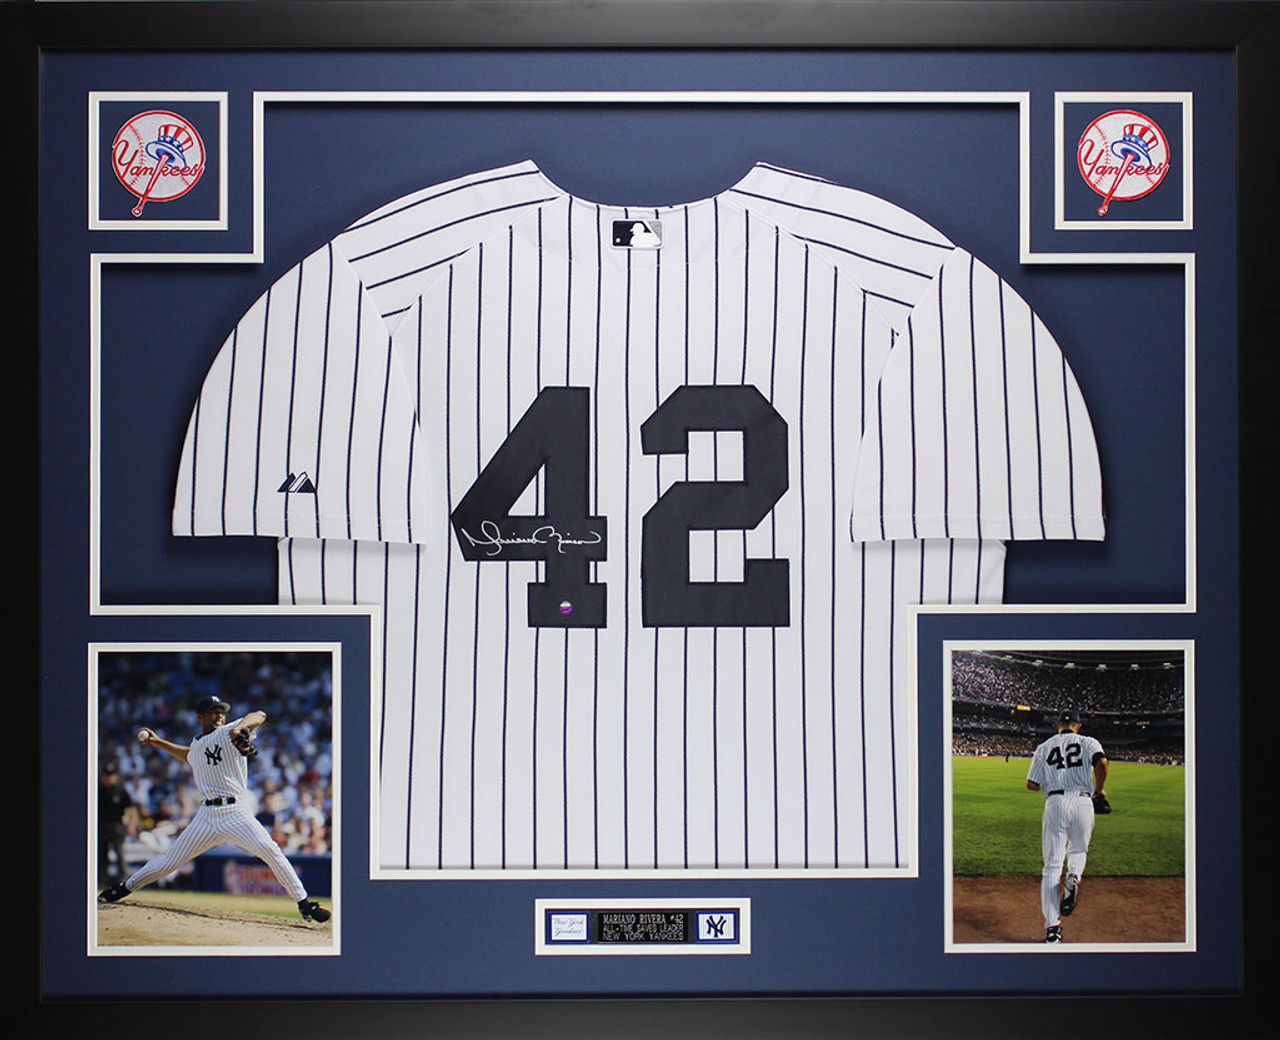 Mariano Rivera Signed Yankees Majestic Authentic Jersey Last To